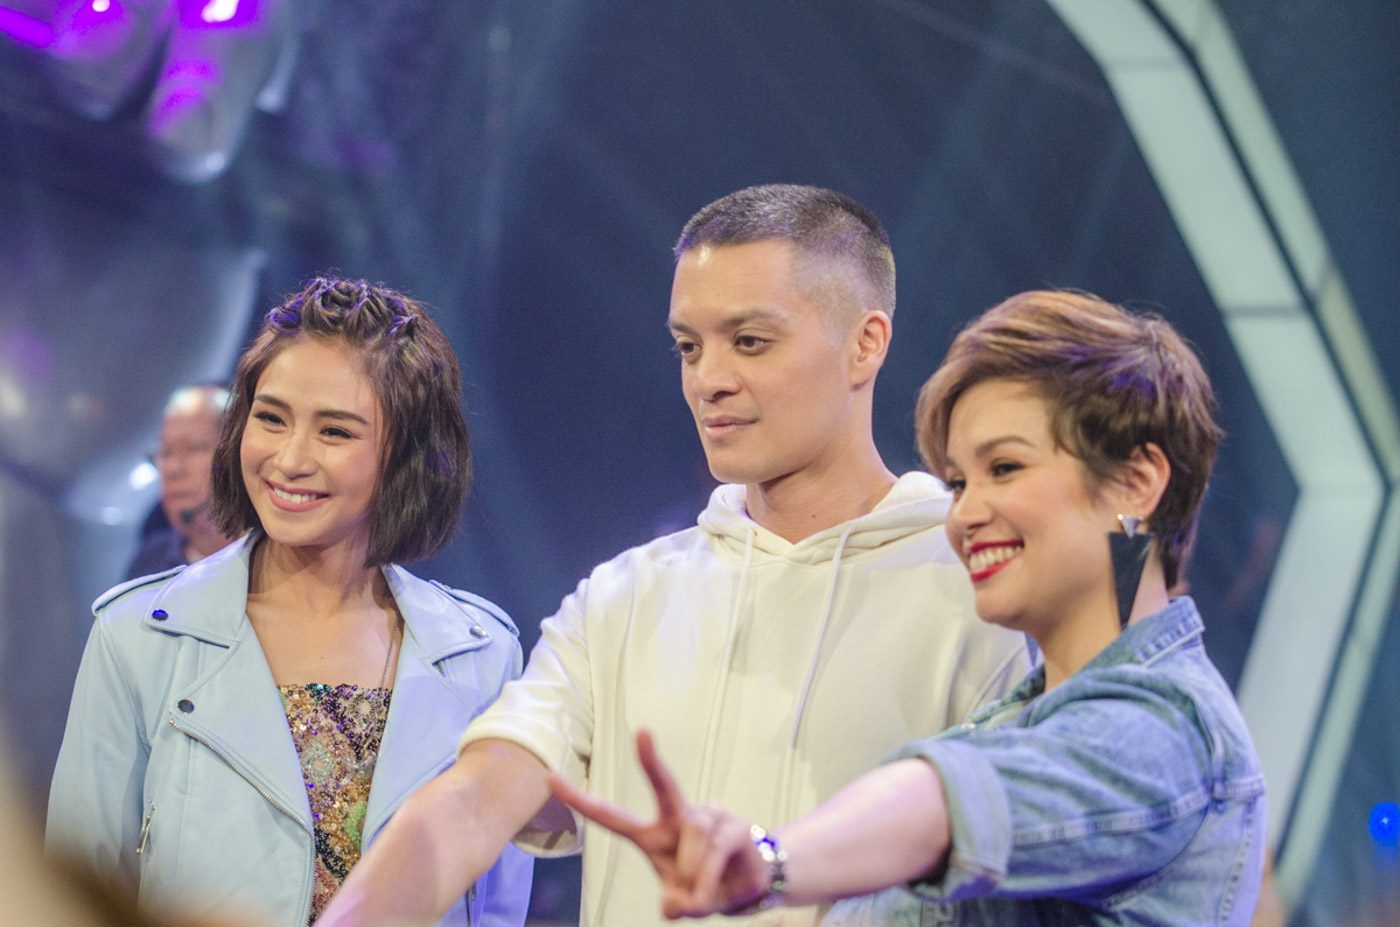 Sarah Geronimo, Bamboo, and Lea Salonga are returning as ‘The Voice Kids Philippines’ mentors